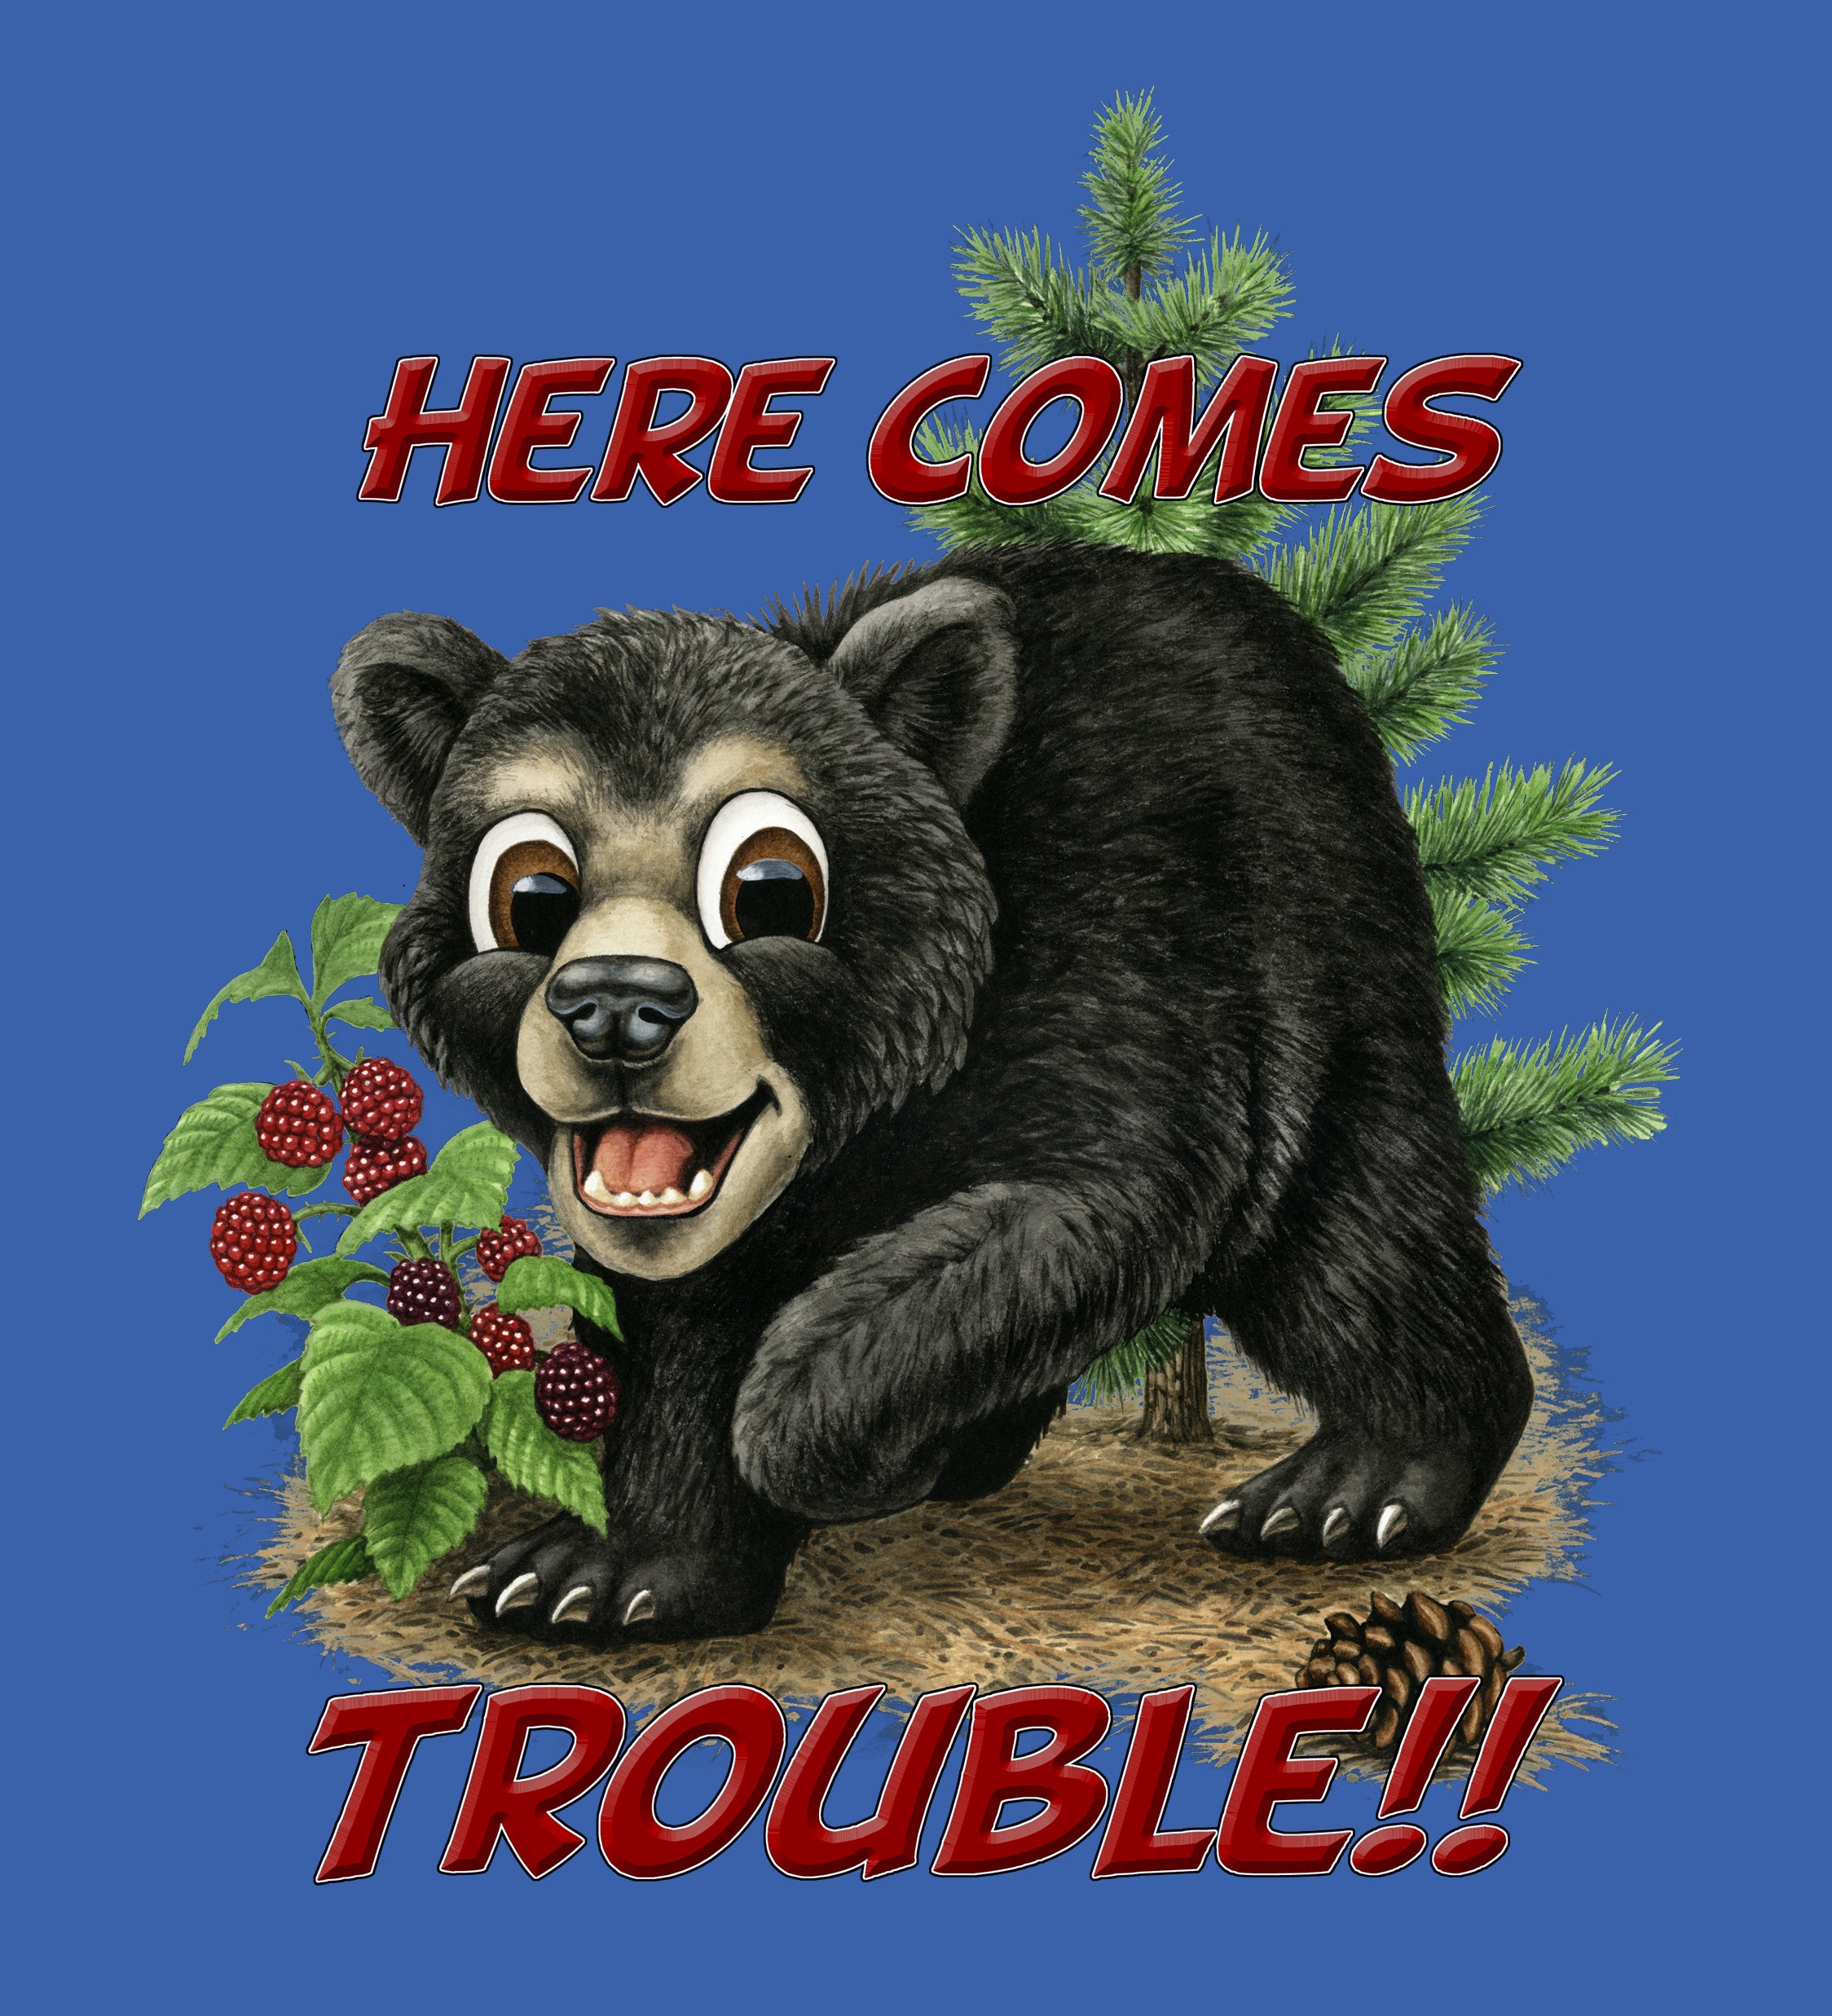 Bear Trouble - painting of a comical bear cub smiling